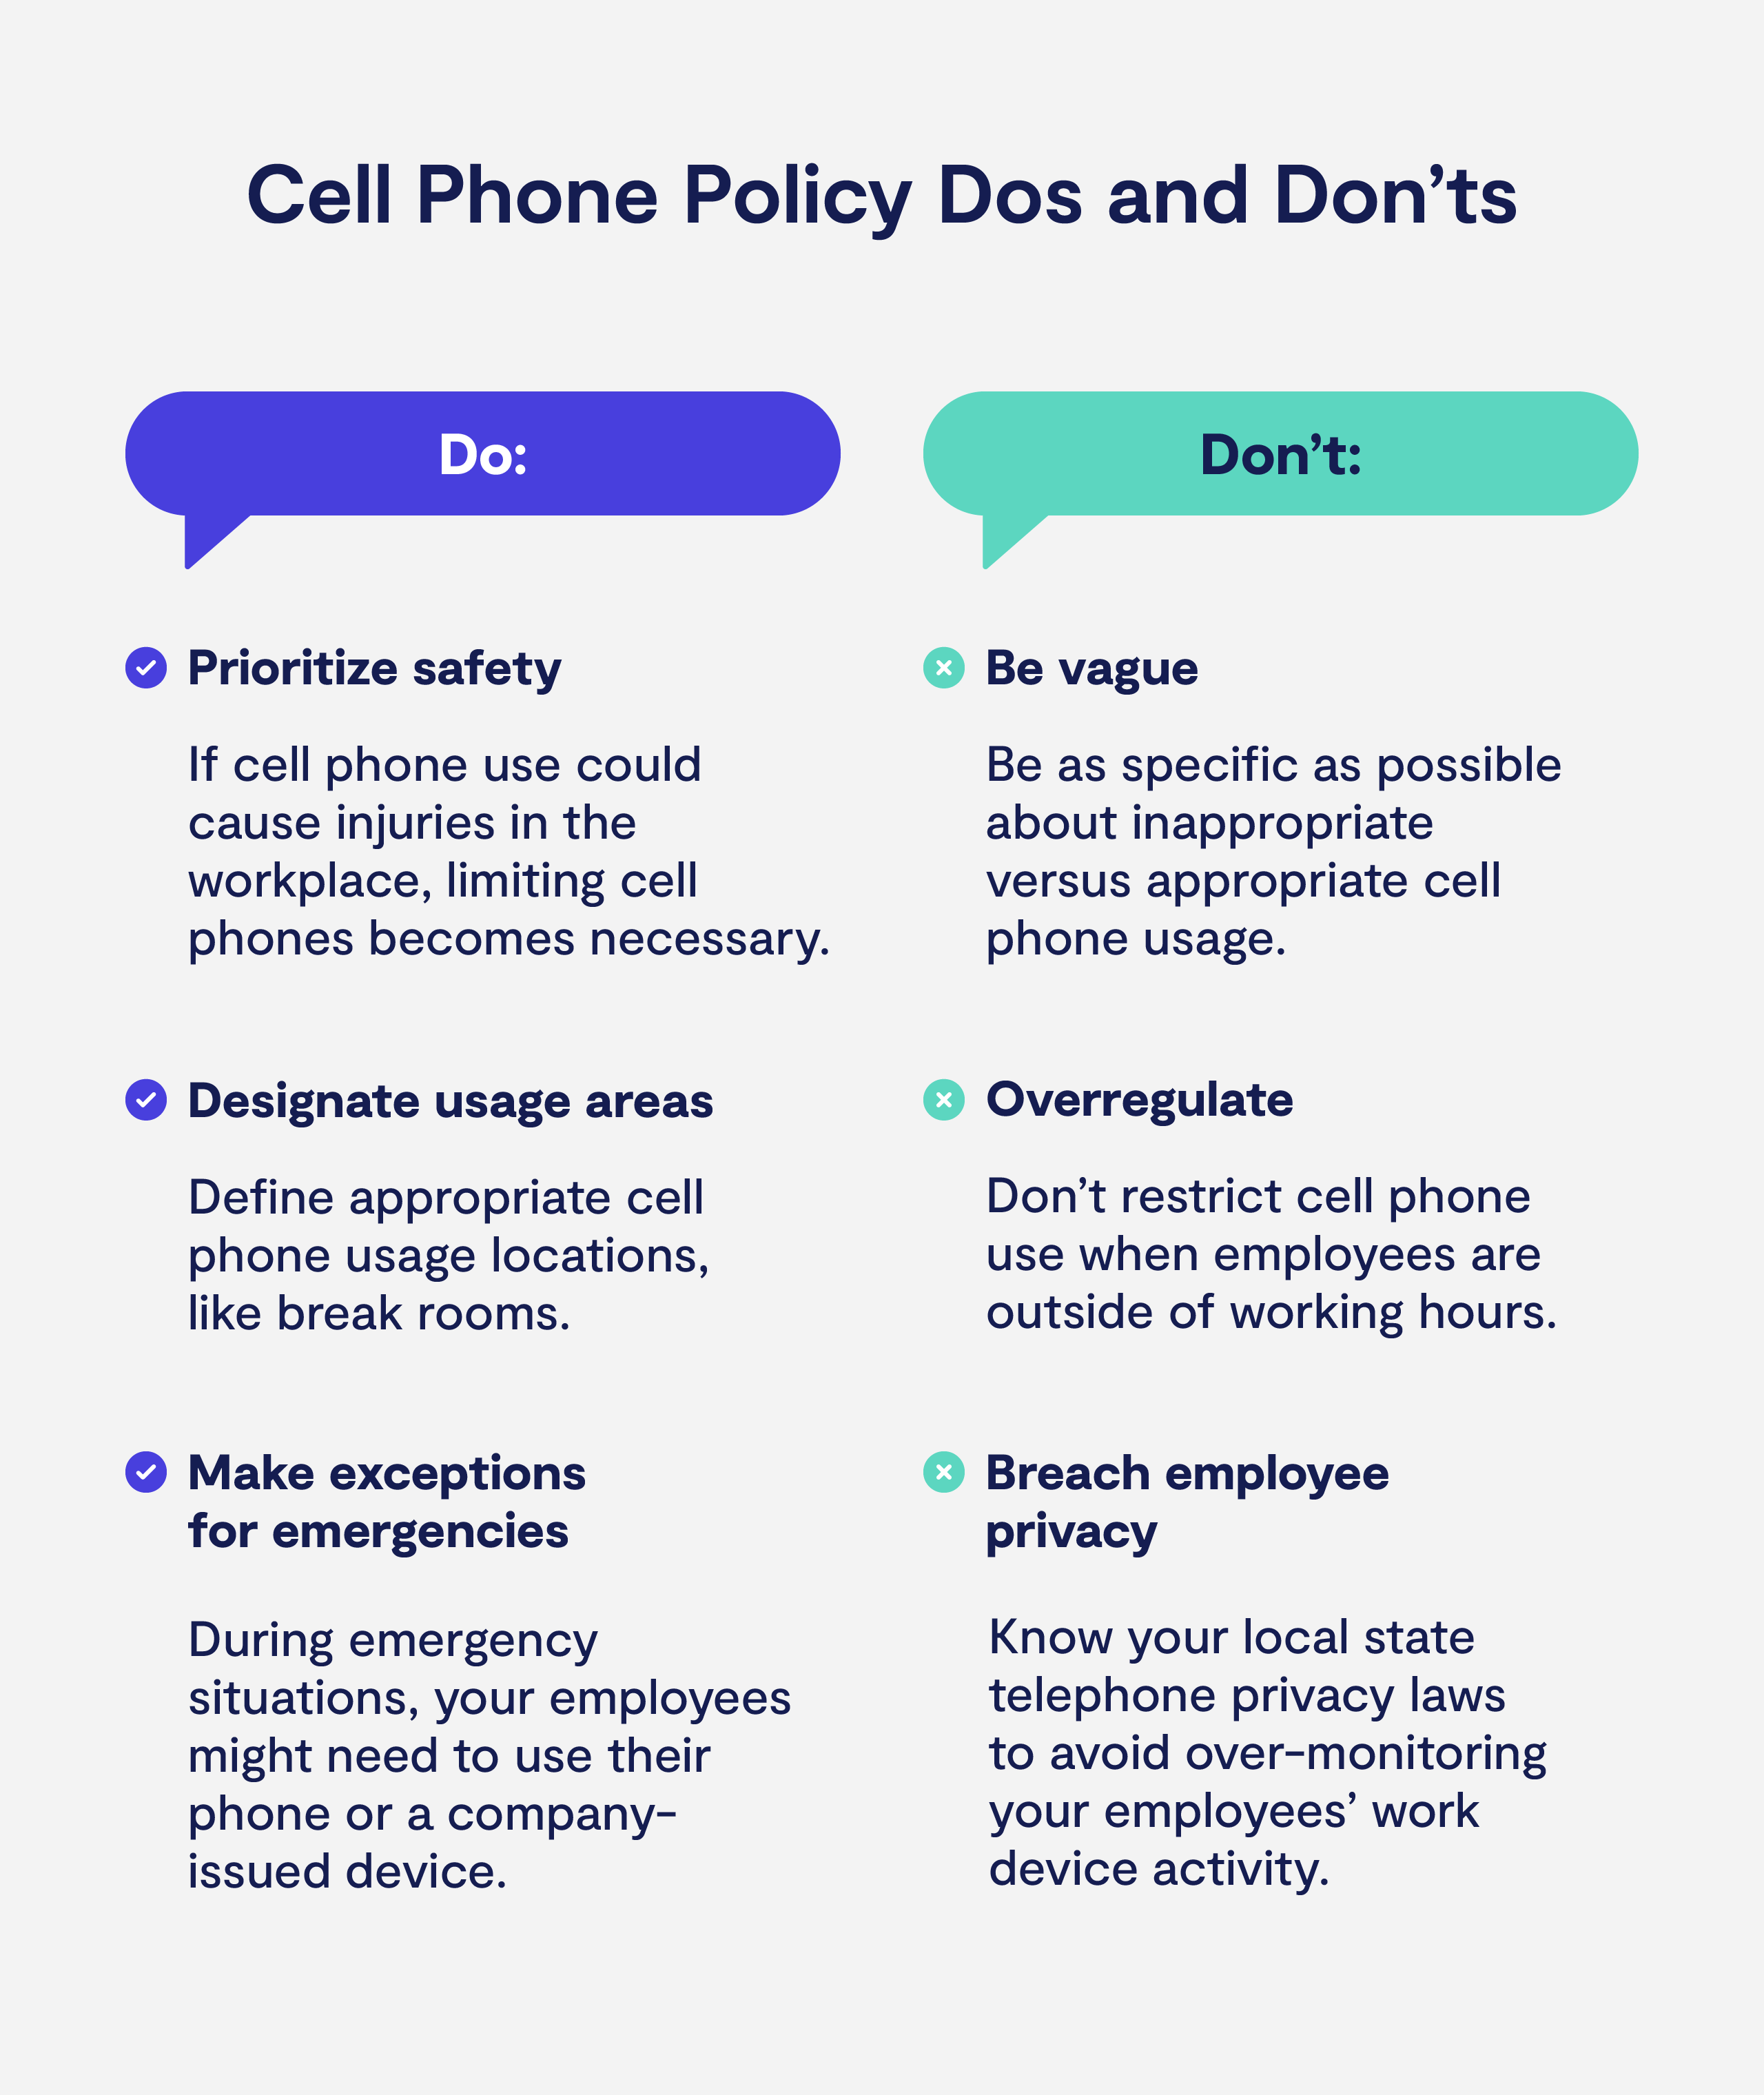 Cell phone policy dos and Don'ts